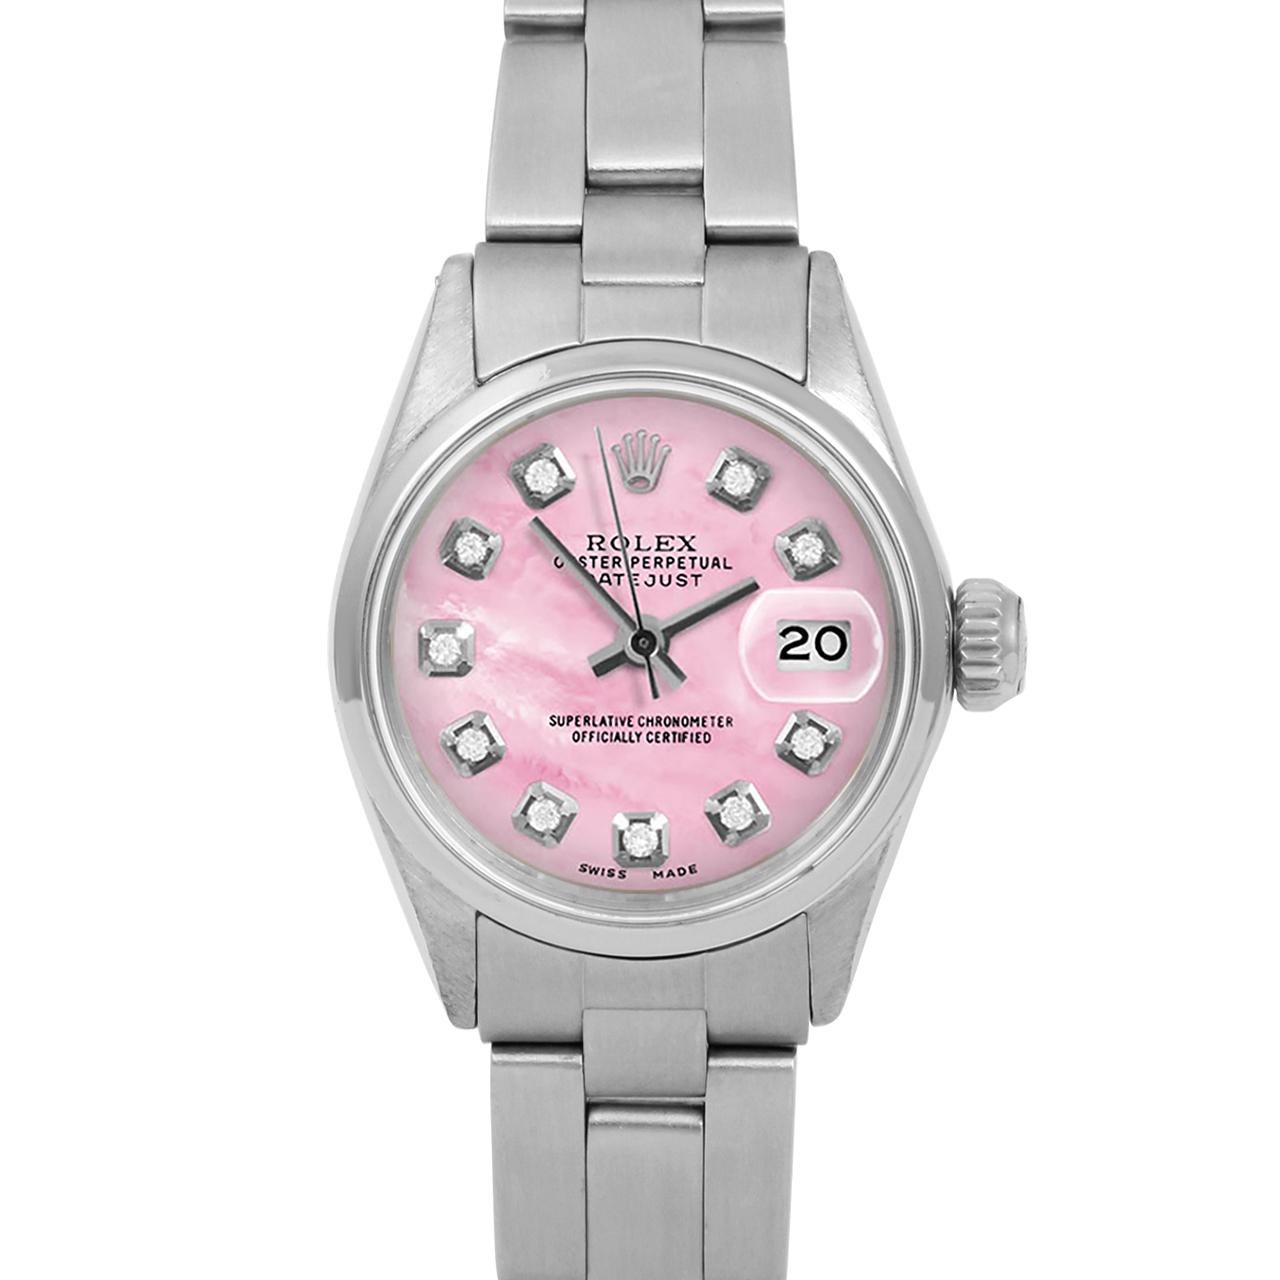 Brand : Rolex
Model : Datejust (Non-Quickset Model)
Gender : Ladies
Metals : Stainless Steel
Case Size : 24 mm
Dial : Custom Pink Mother Of Pearl Diamond Dial (This dial is not original Rolex And has been added aftermarket yet is a beautiful Custom